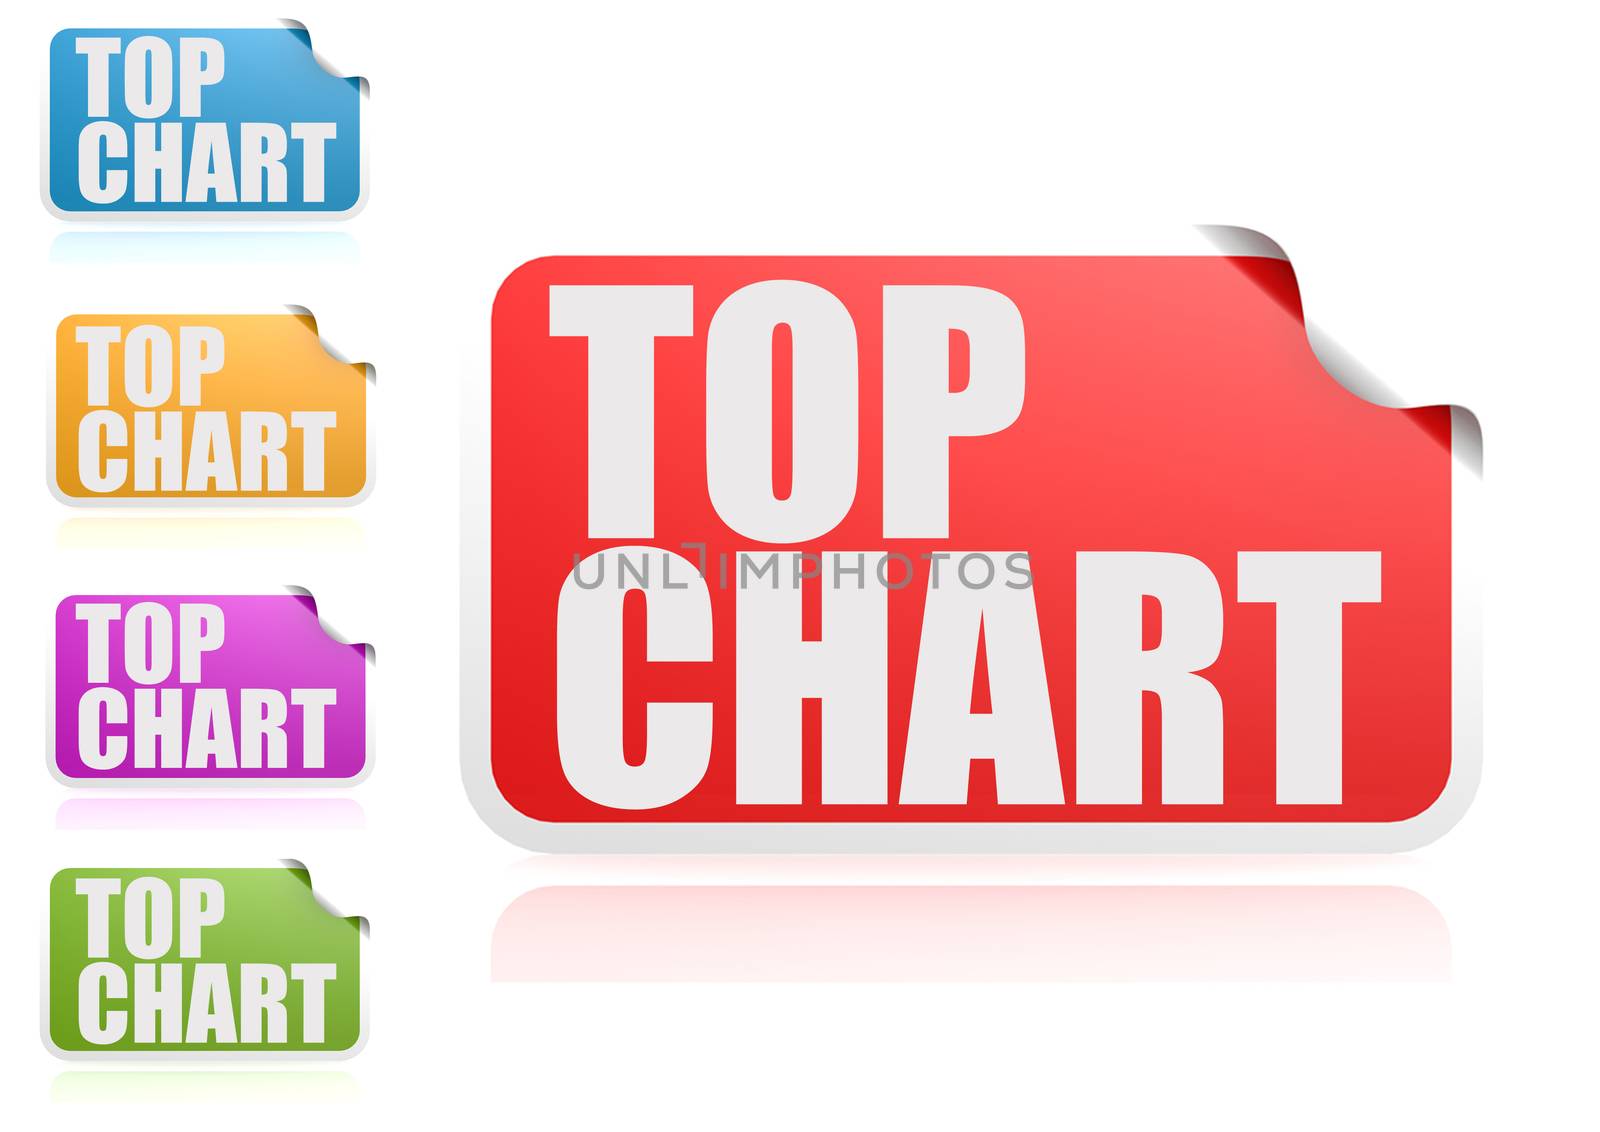 Top chart label set by tang90246